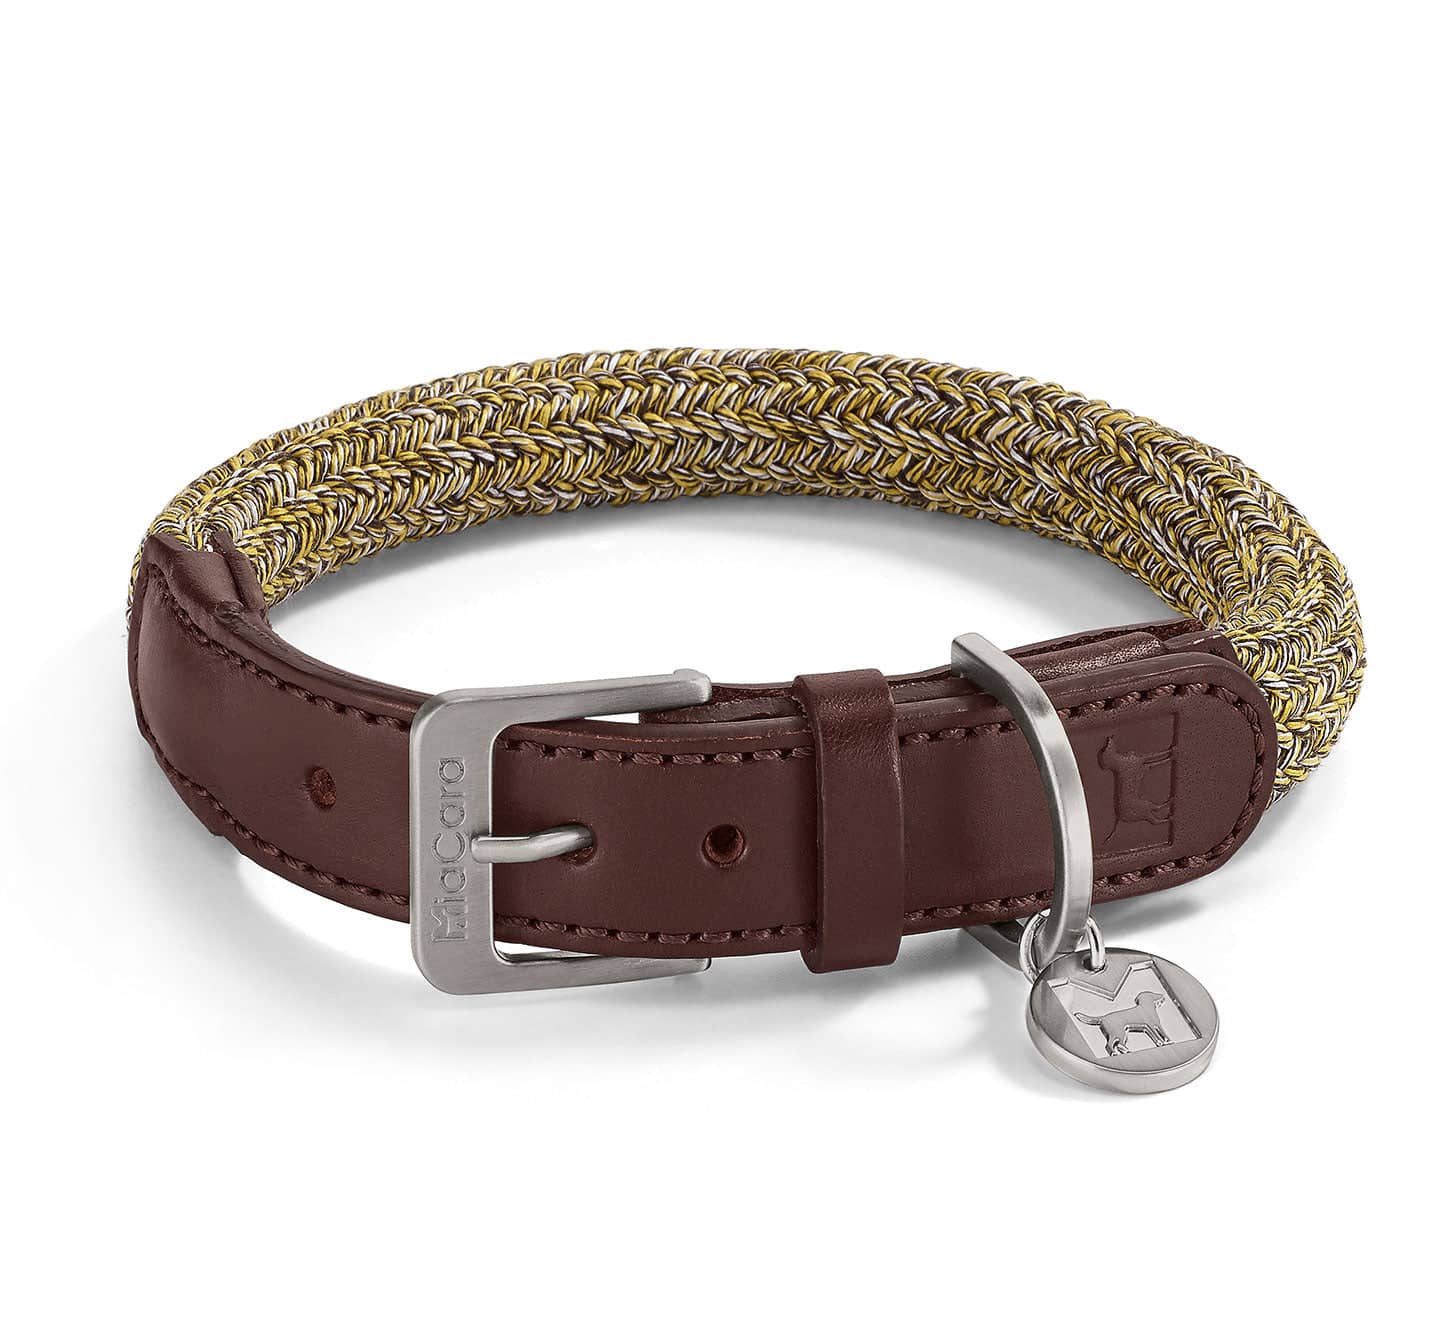 Handcrafted designer dog collar by MiaCara with brass hook